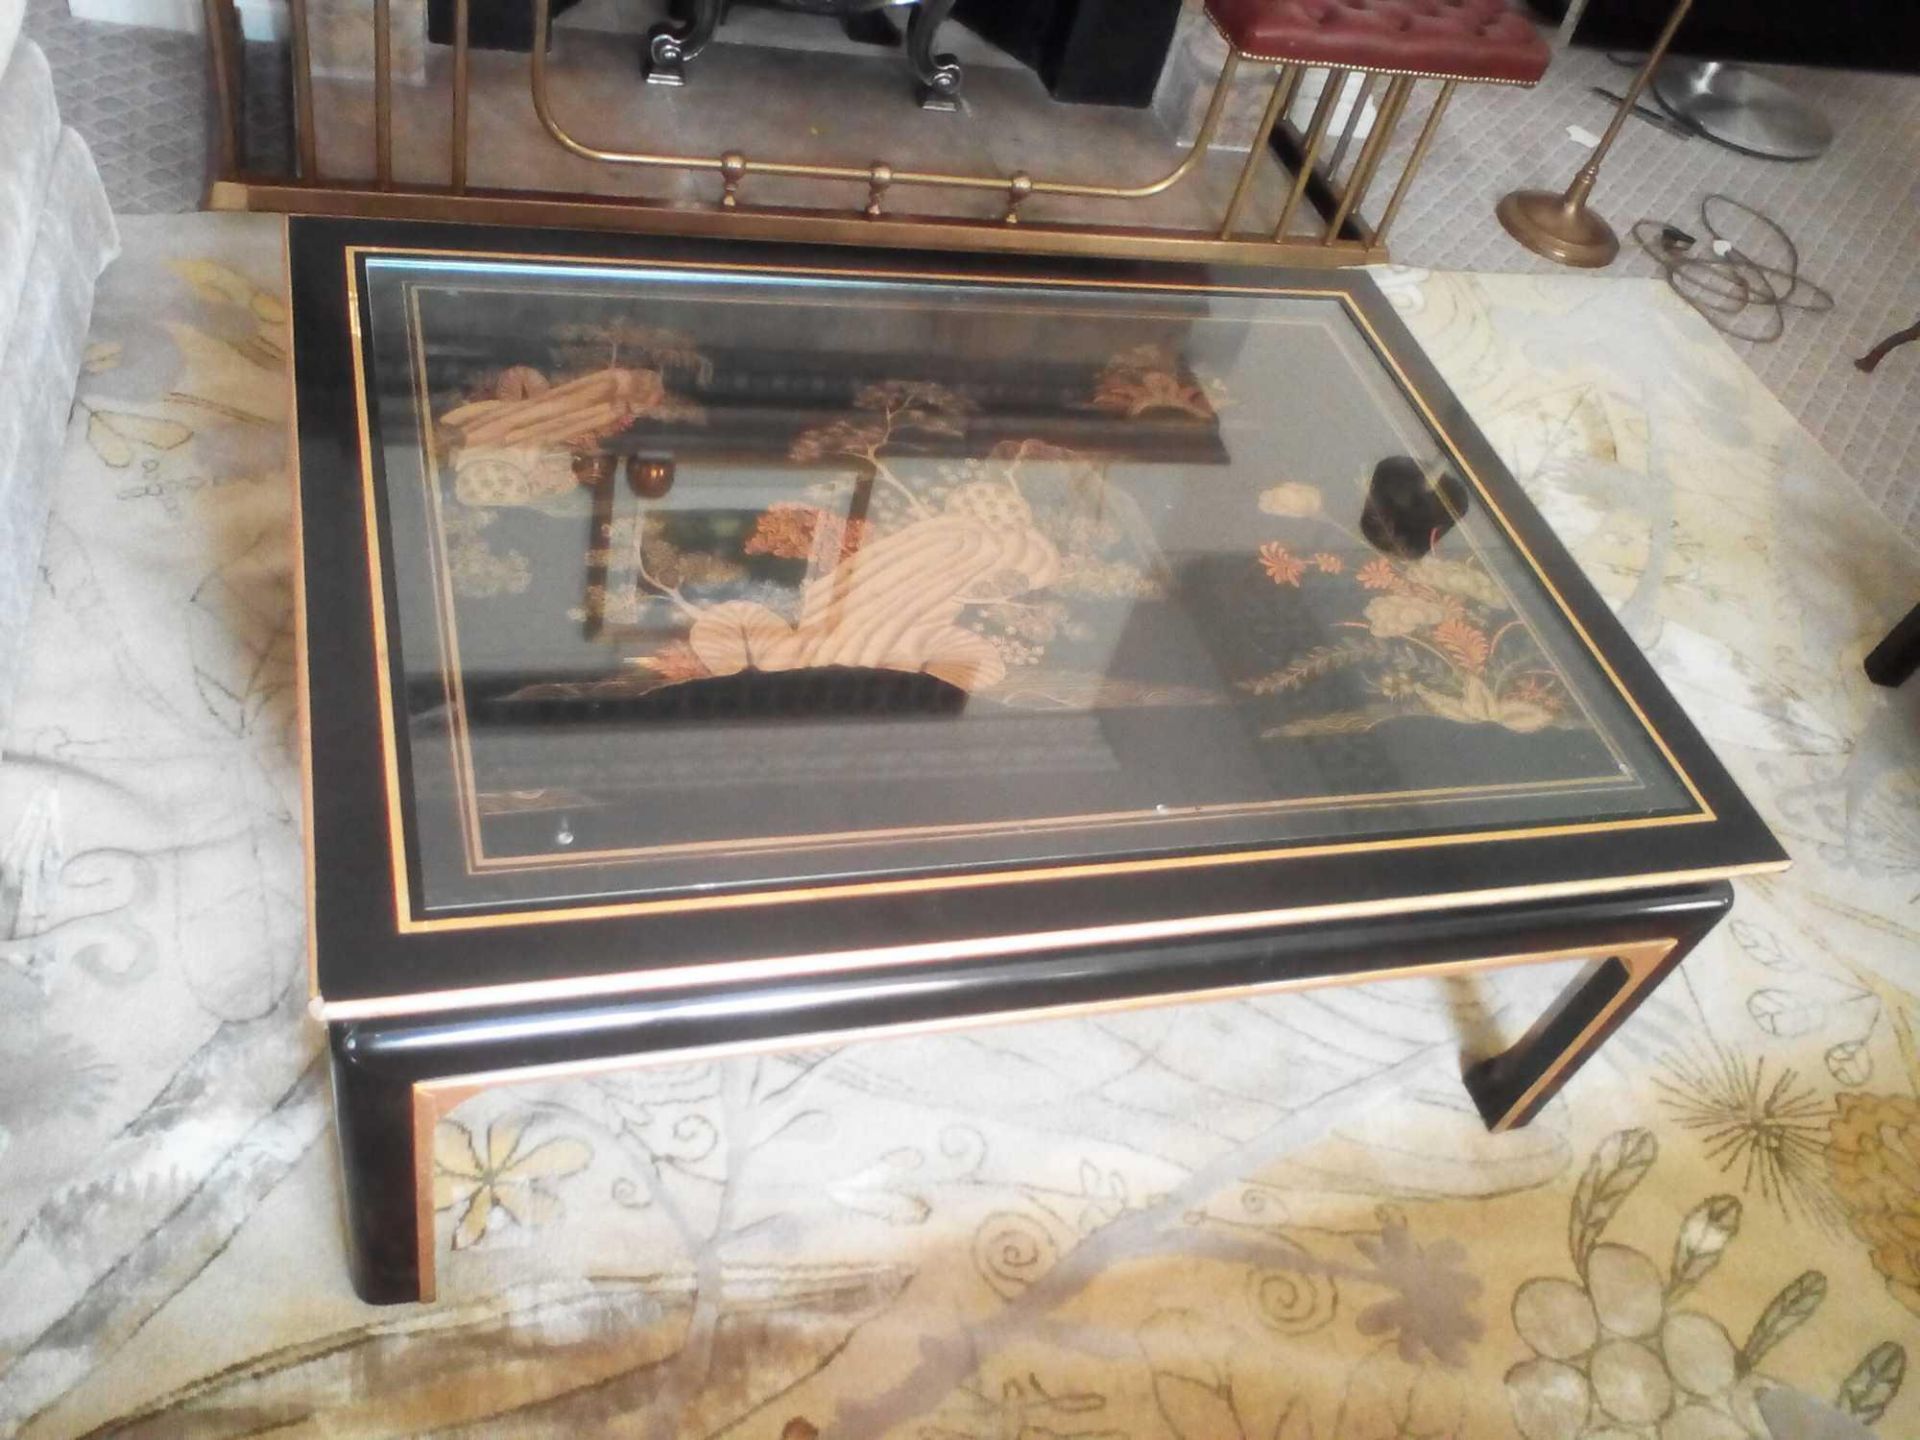 Black Lacquer Hand Decorated Chinoiserie Coffee Table With Gilt Line Detail 120 x 90 x 46cm - Image 2 of 3